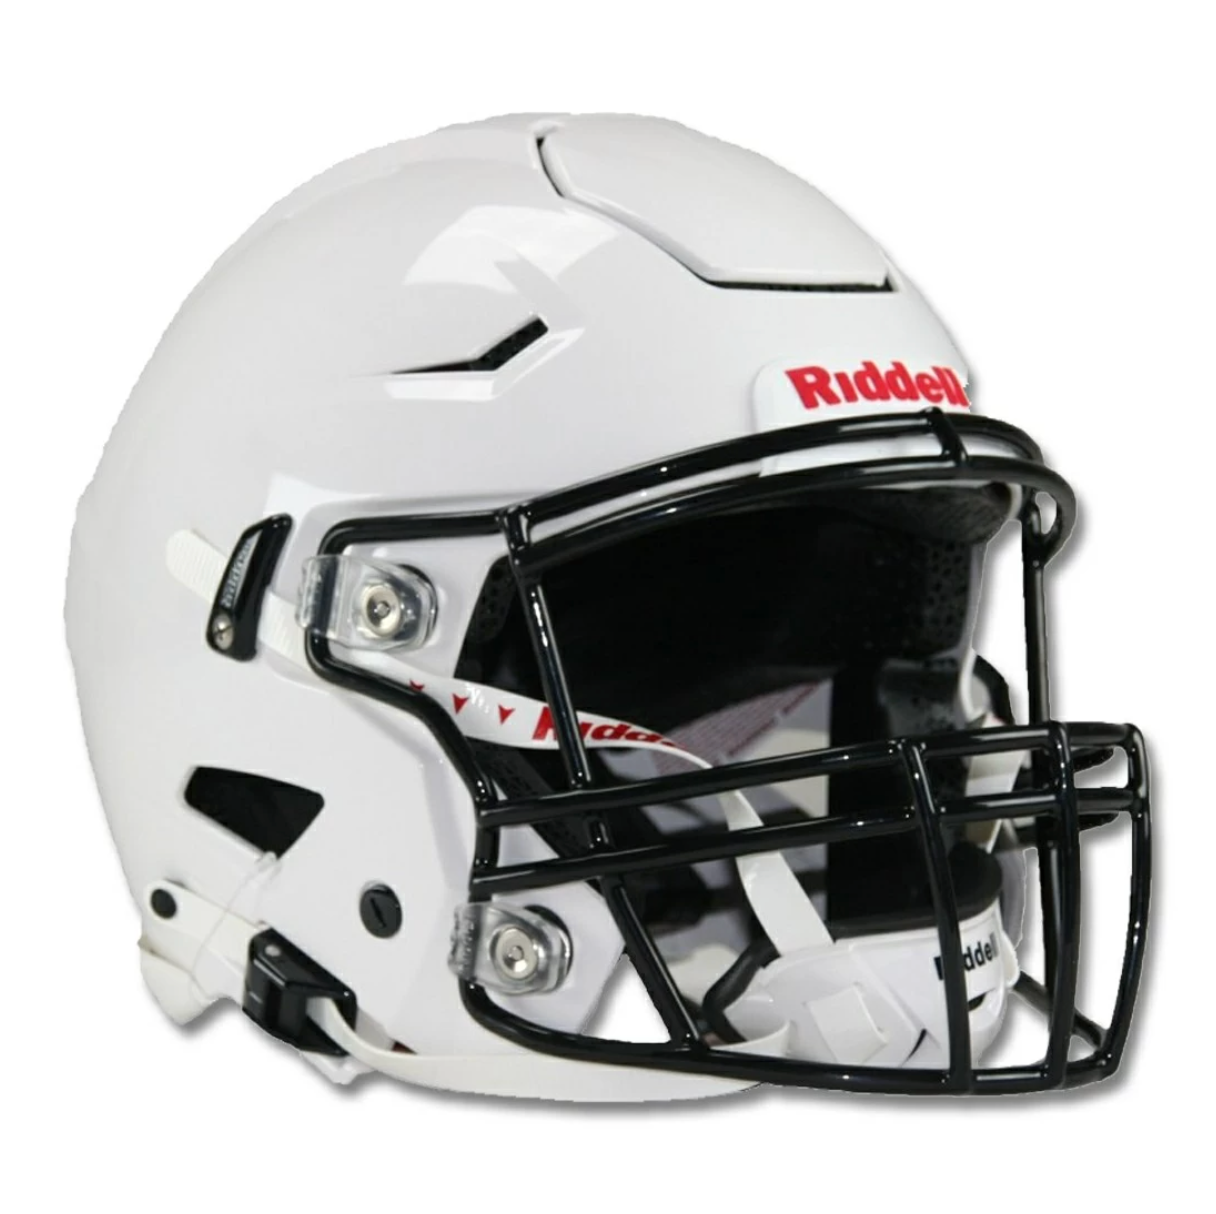 a white SpeedFlex helmet with a red and white logo on it